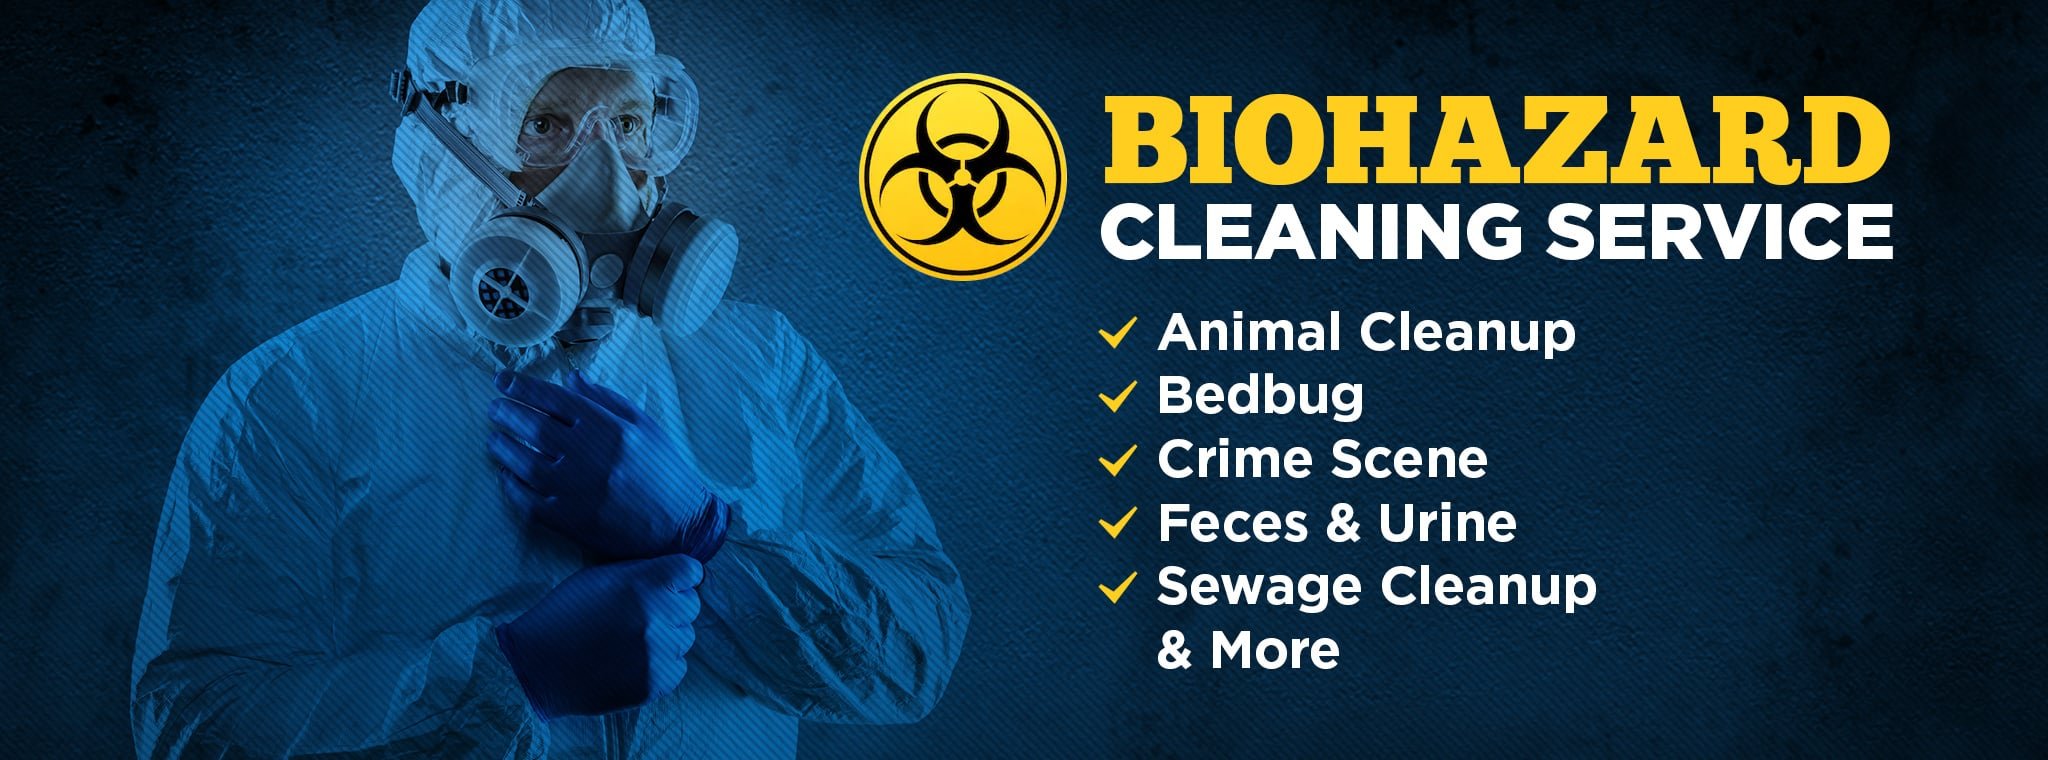 biohazard cleaning and hazardous cleanup in New York, NY. and Tri-State Area